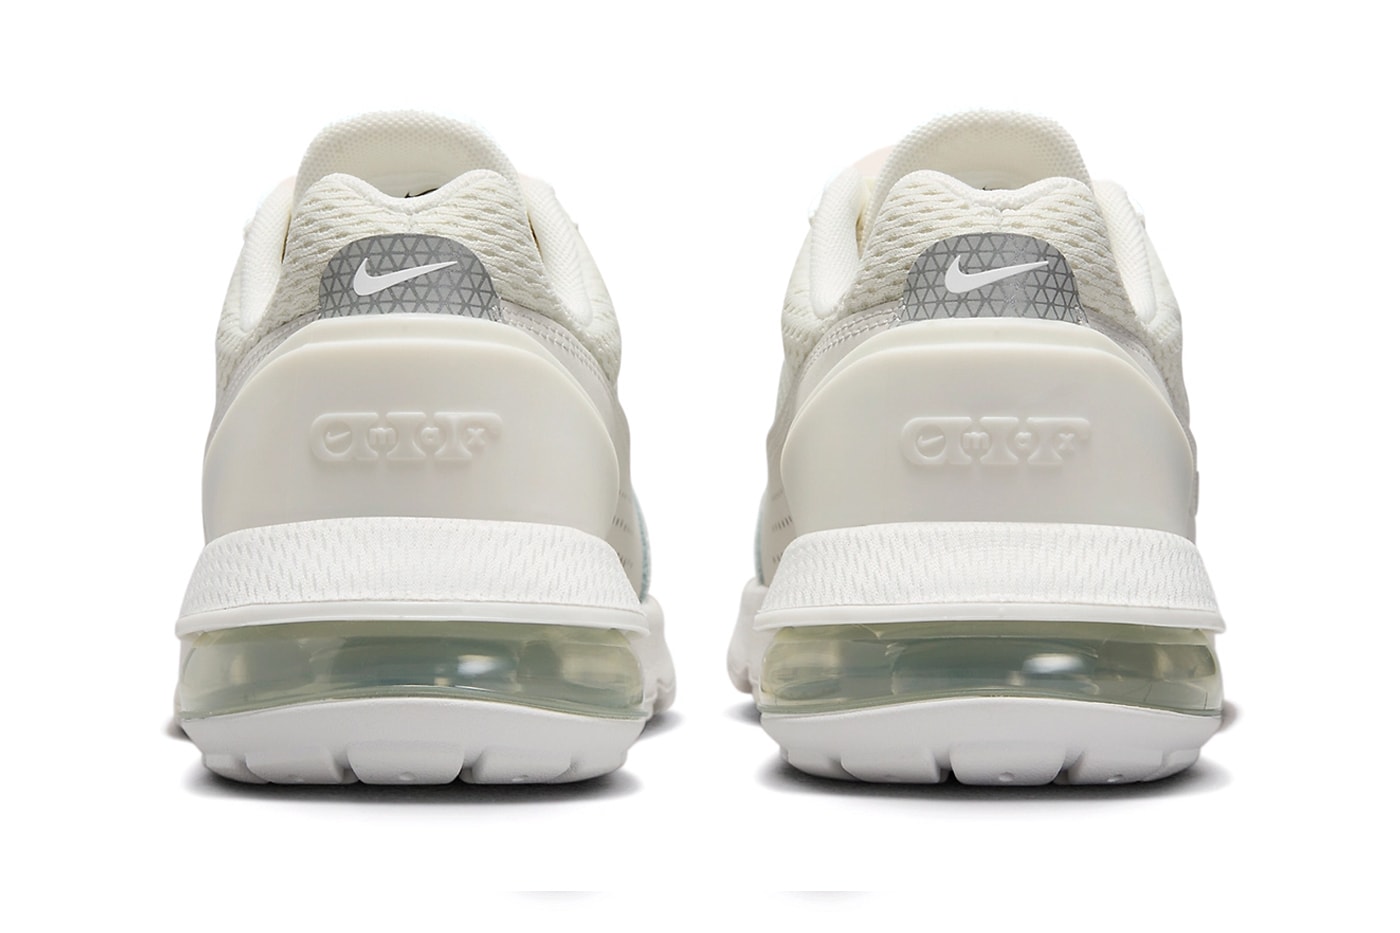 Nike Air Max Pulse Surfaces in Tonal "Sail" Hues for Summer womens all white shoe sneakers comfort everyday